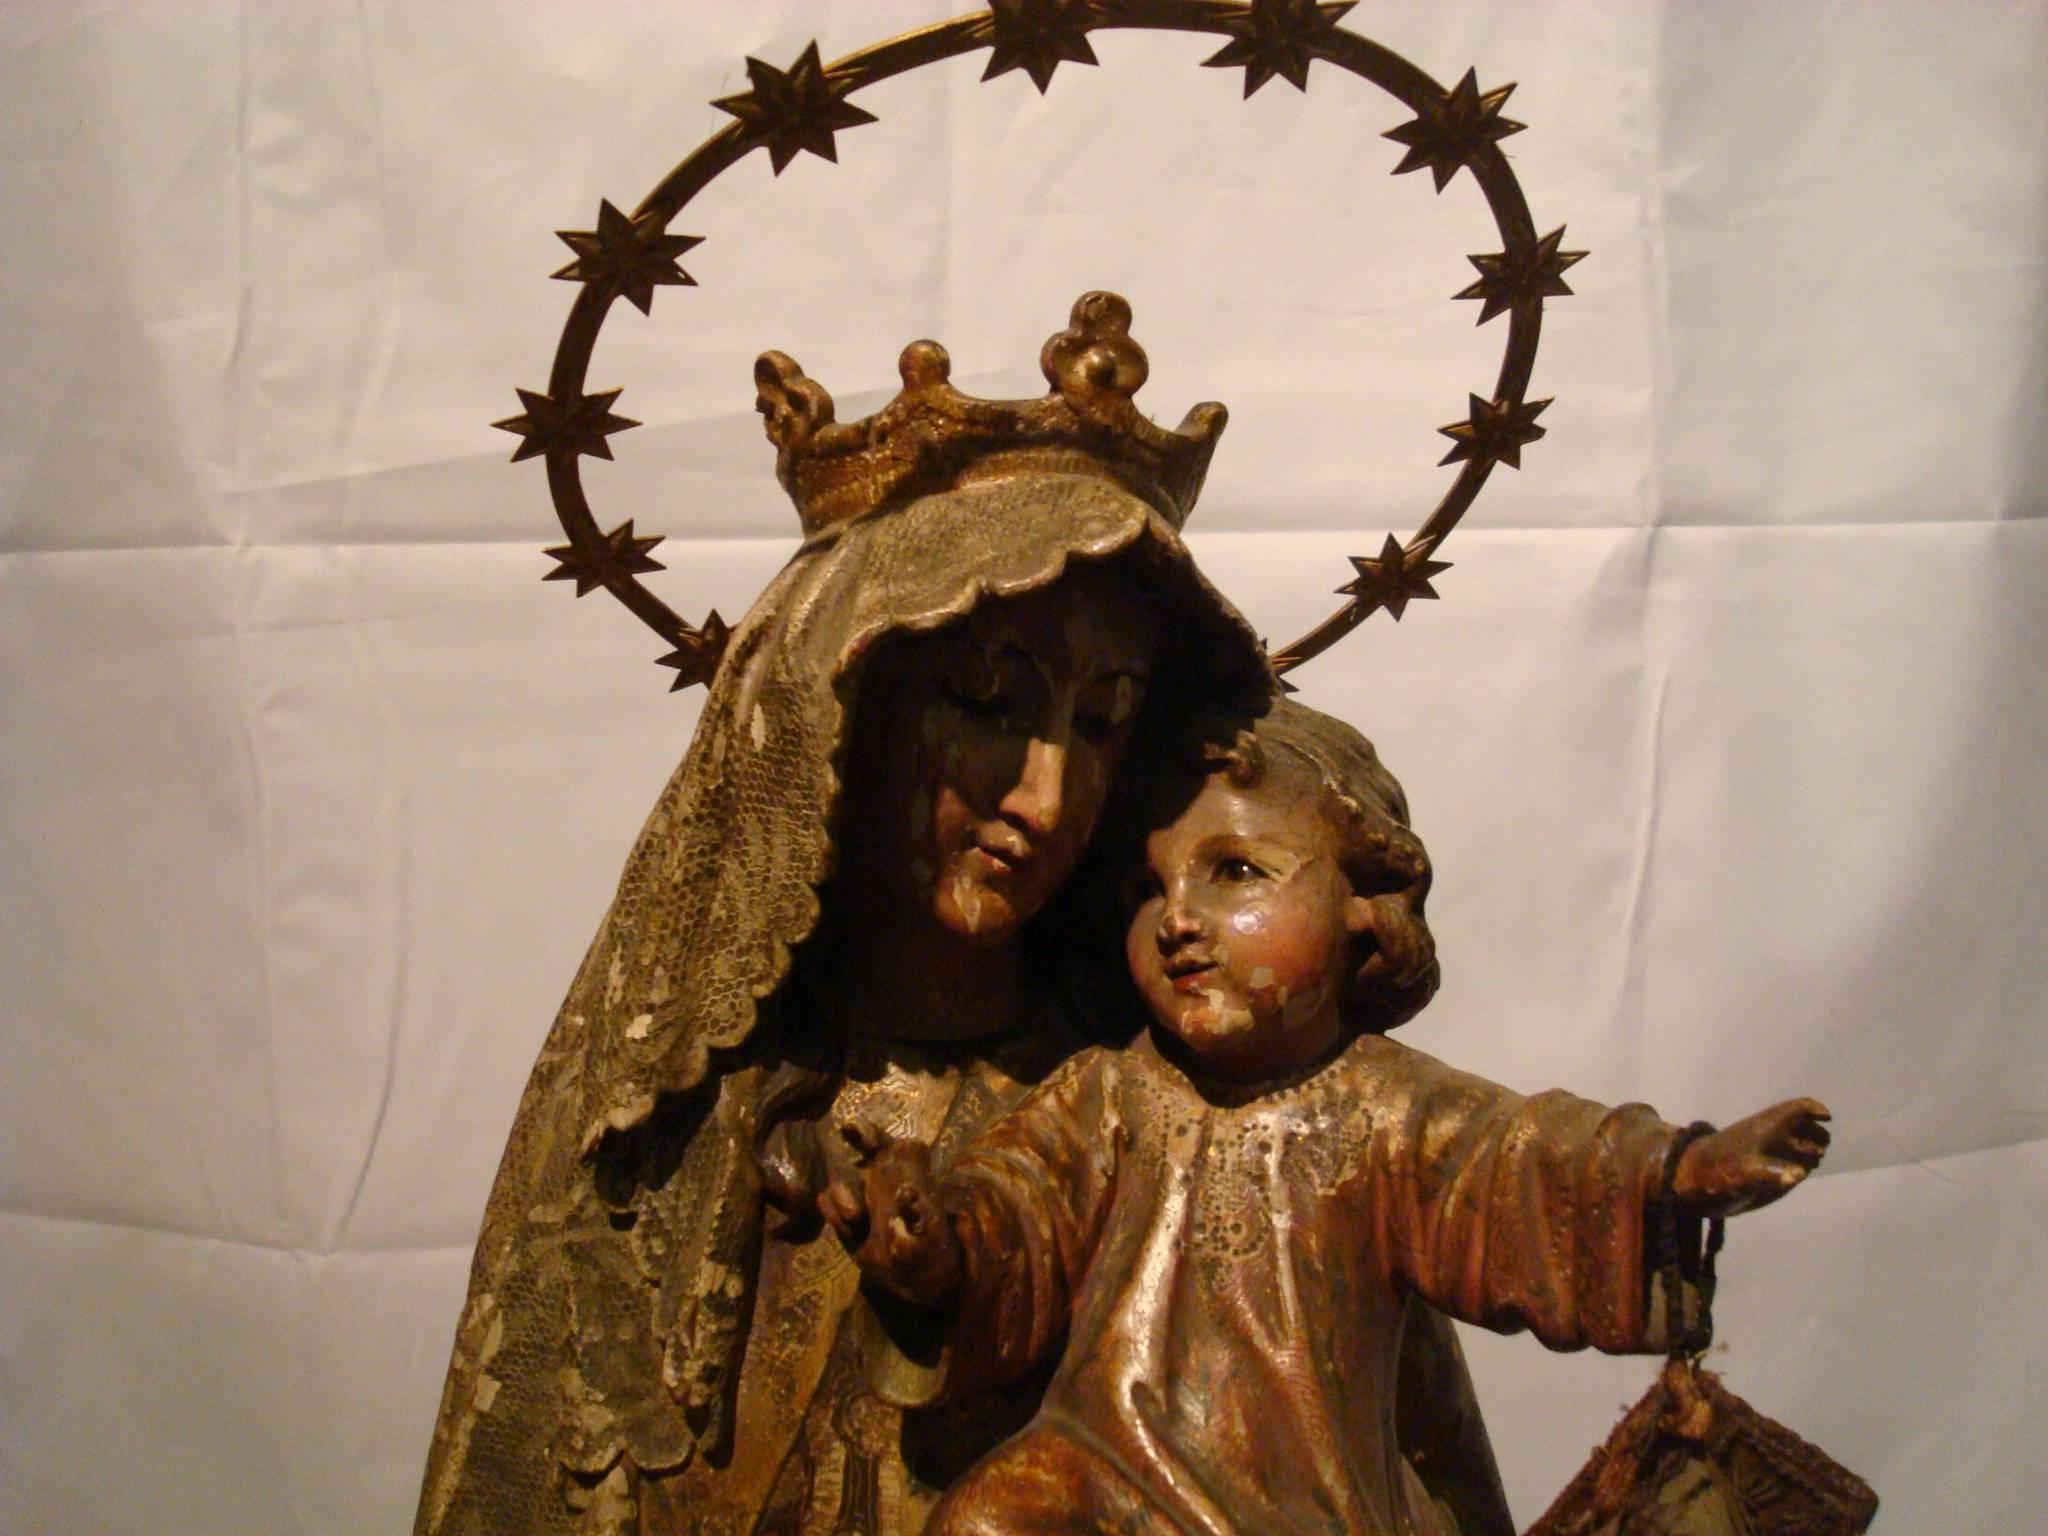 19th century wooden sculpture of The Crowned Virgin - wood carved polychrome figure of Virgin Mary - Madonna and Jesus Child from Spain. Catholic.
The hand-carved wooden figure is a typical Spanish depiction of Mary with the Infant Jesus. She is